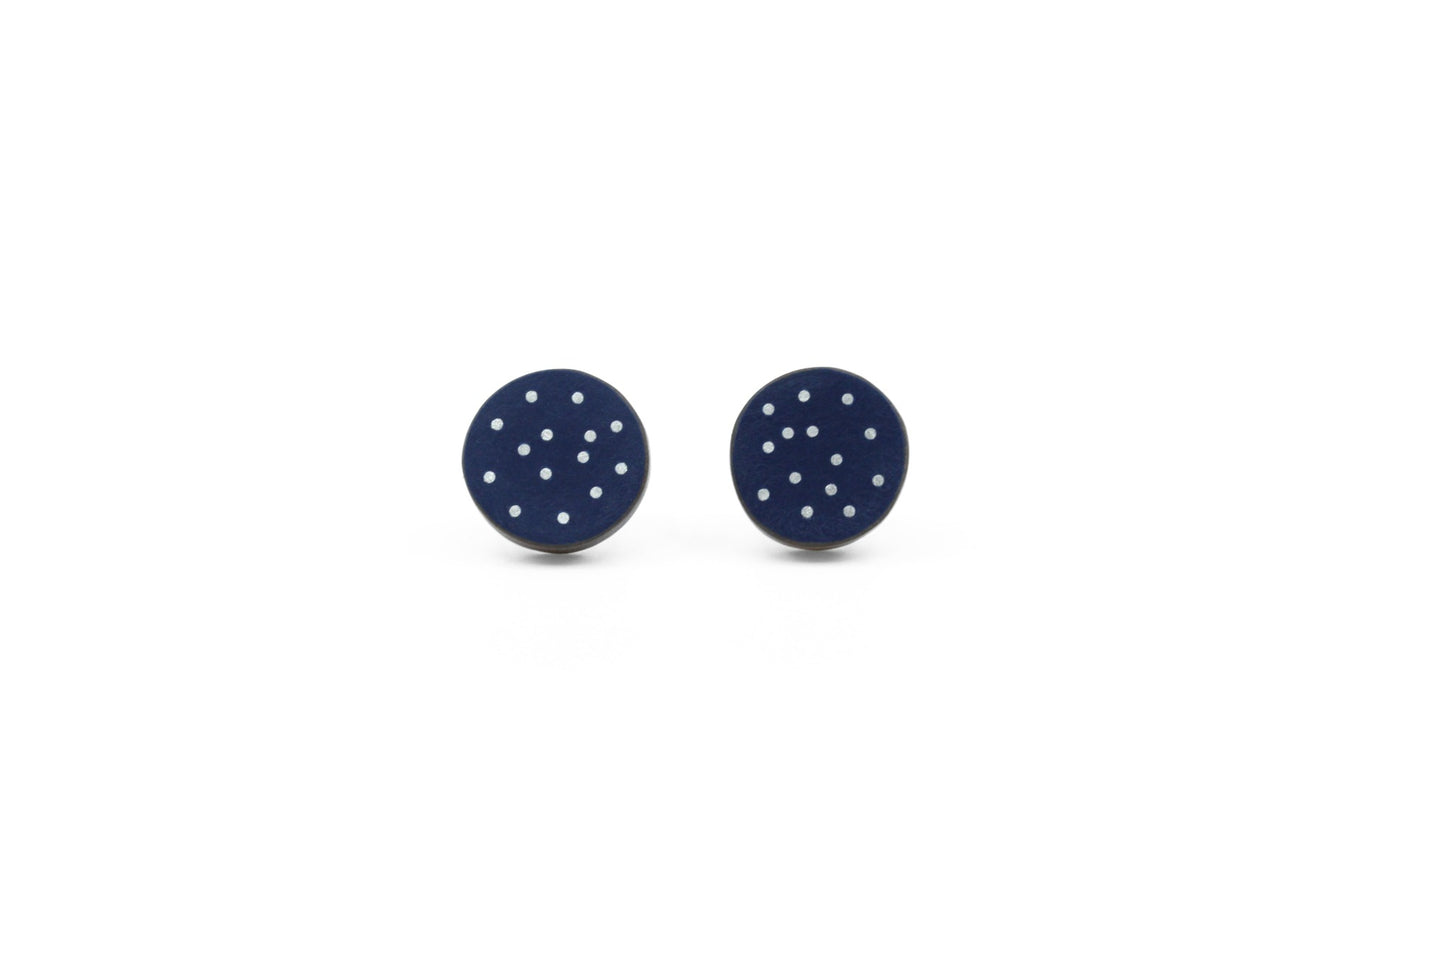 Small Inlaid Dot Studs in Navy